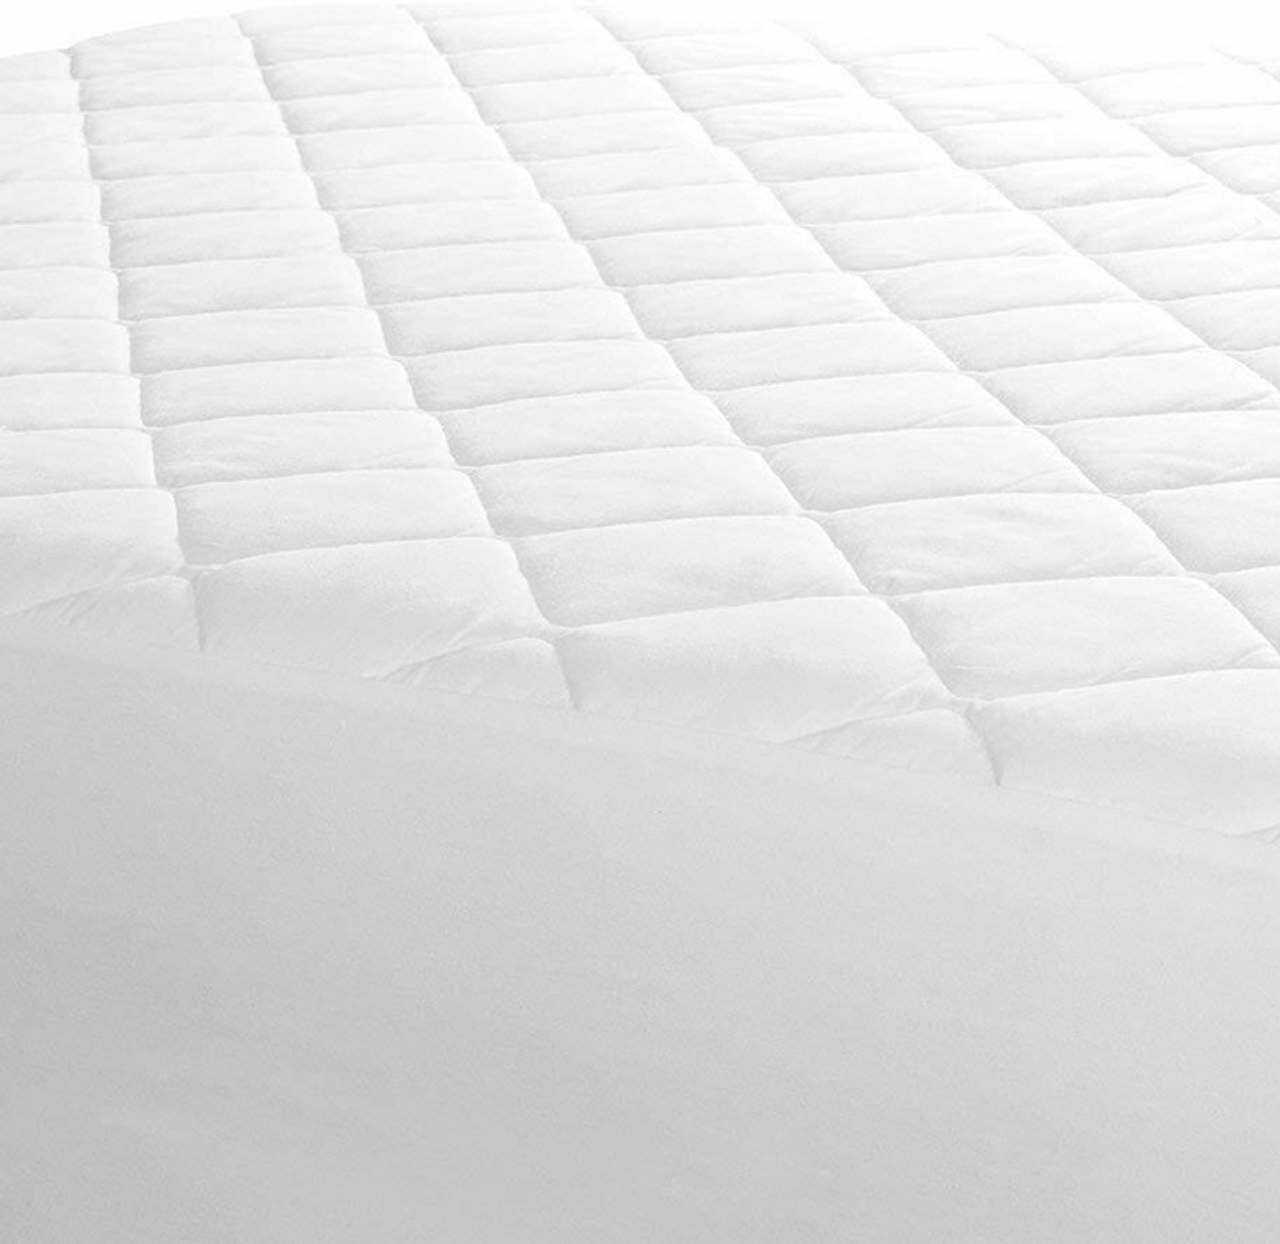 Beauty Sleep™ Ultra-Soft Hypoallergenic Quilted Mattress Pad product image